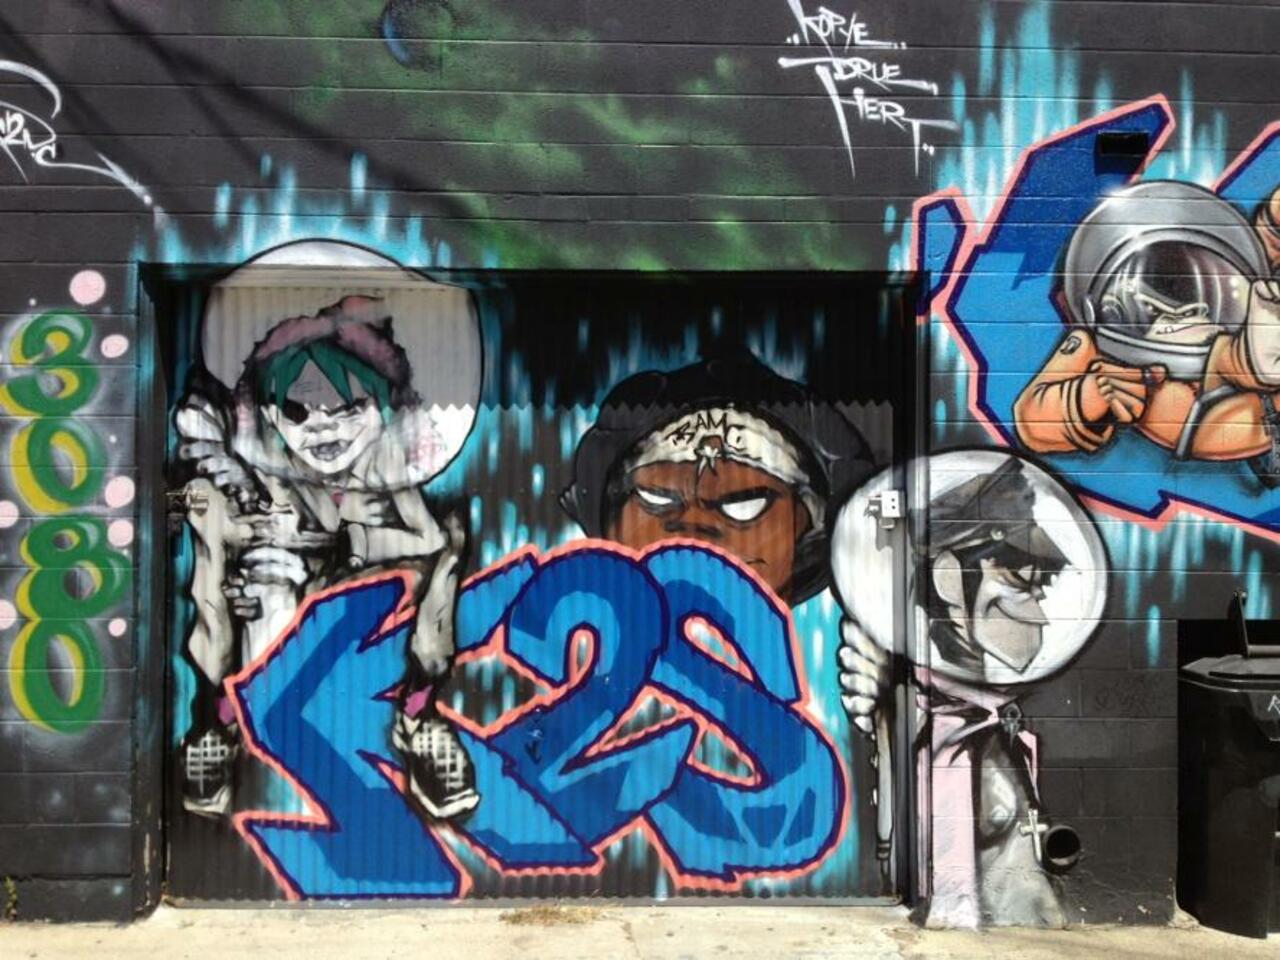 RT @boredtwodeath1: These #Gorillaz live in an alley! #Streetart in #SanDiego. #Graffiti photo by me! #graphicdesign #NorthPark http://t.co/MBDHudato9